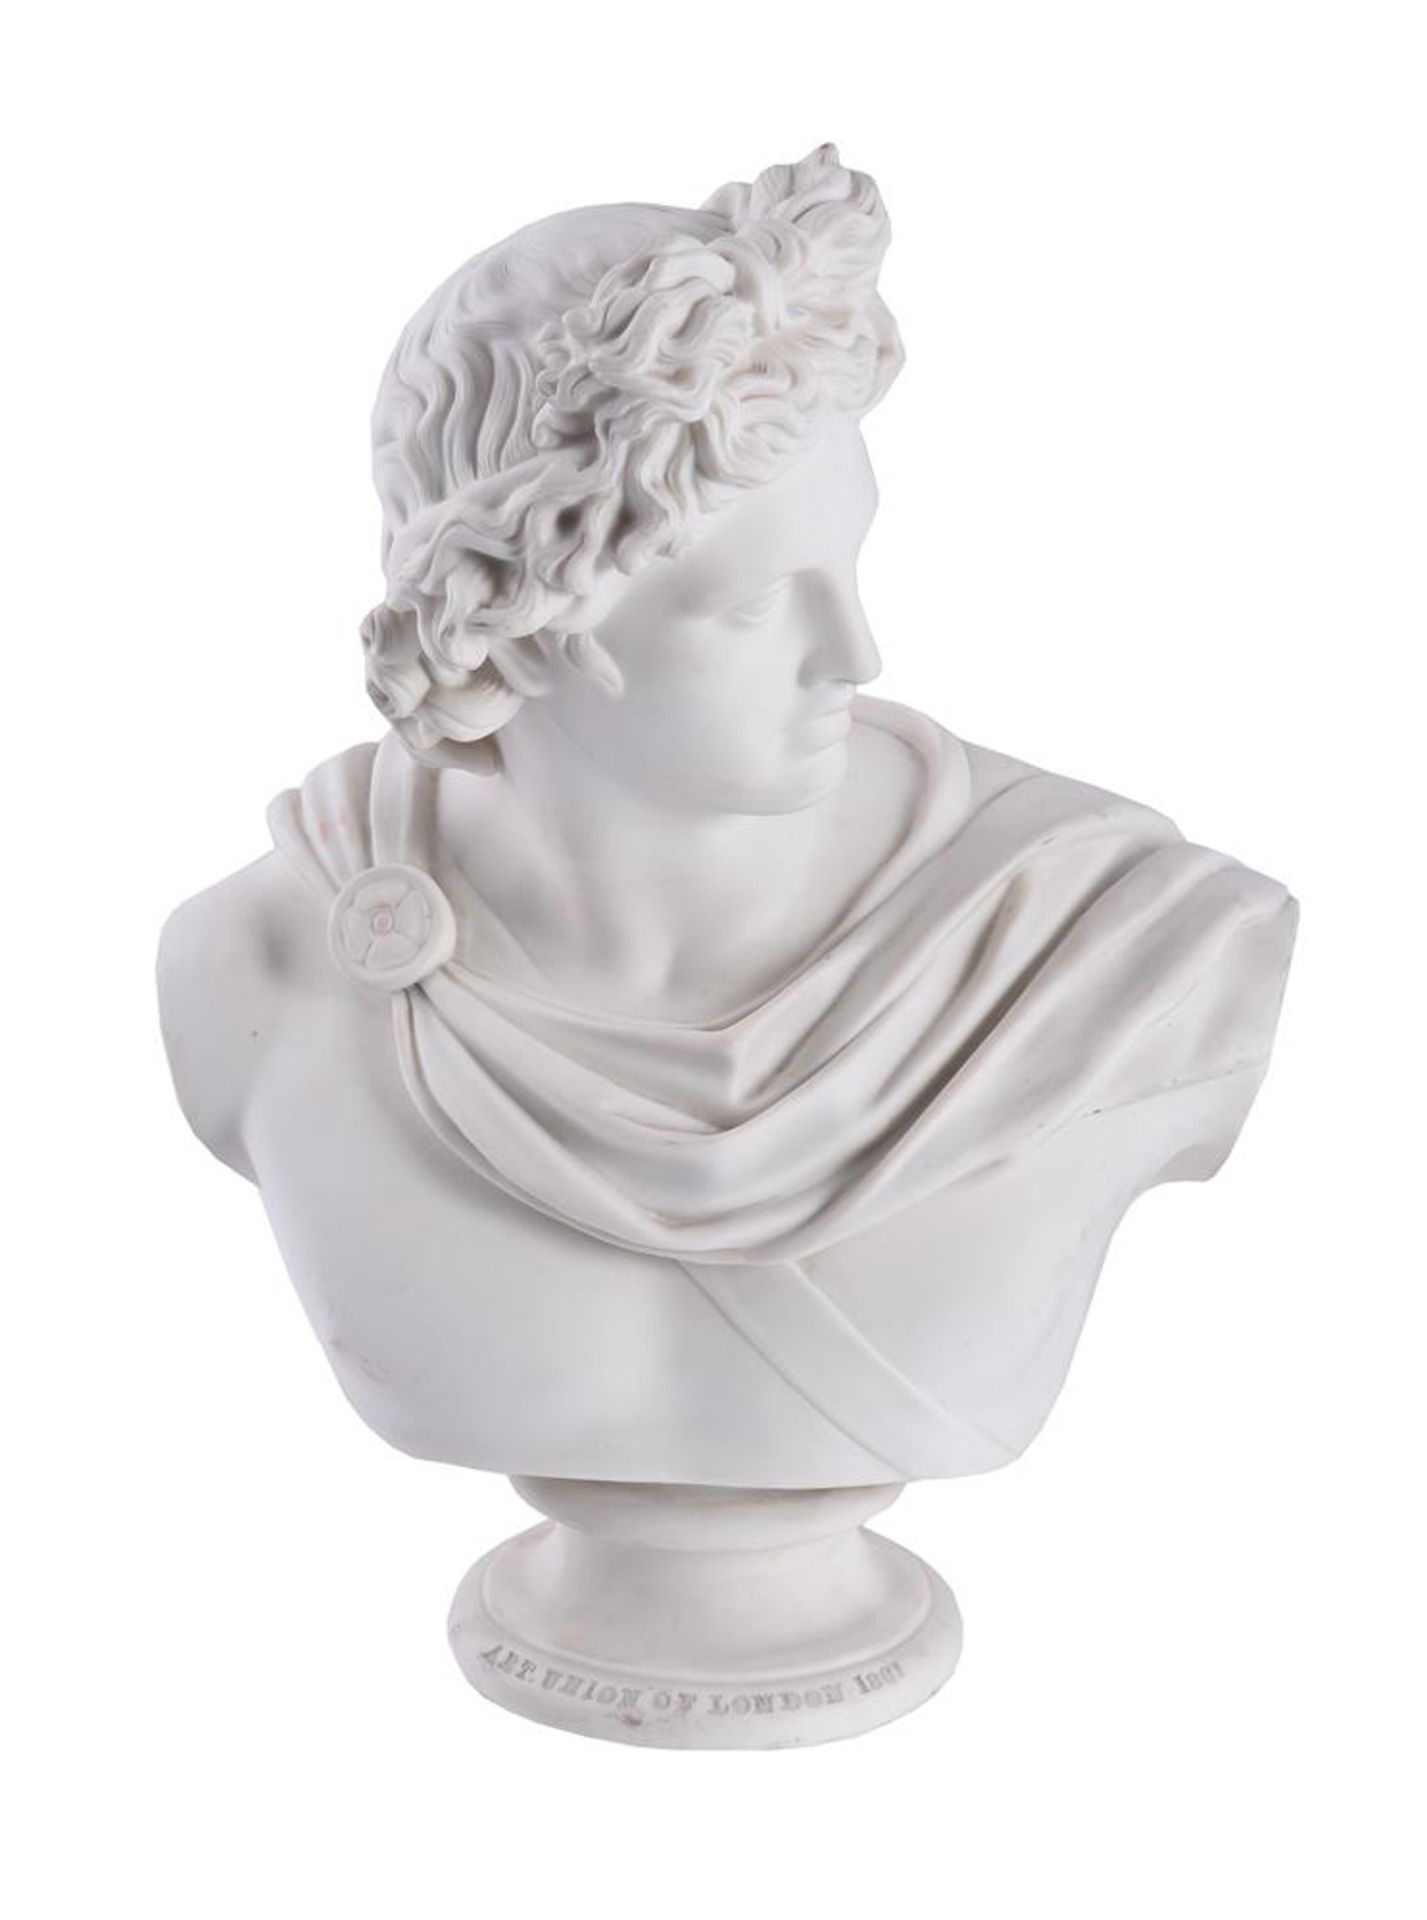 C. DELPECH FOR ART UNION OF LONDON, AN ENGLISH PARIAN BUST OF APOLLO